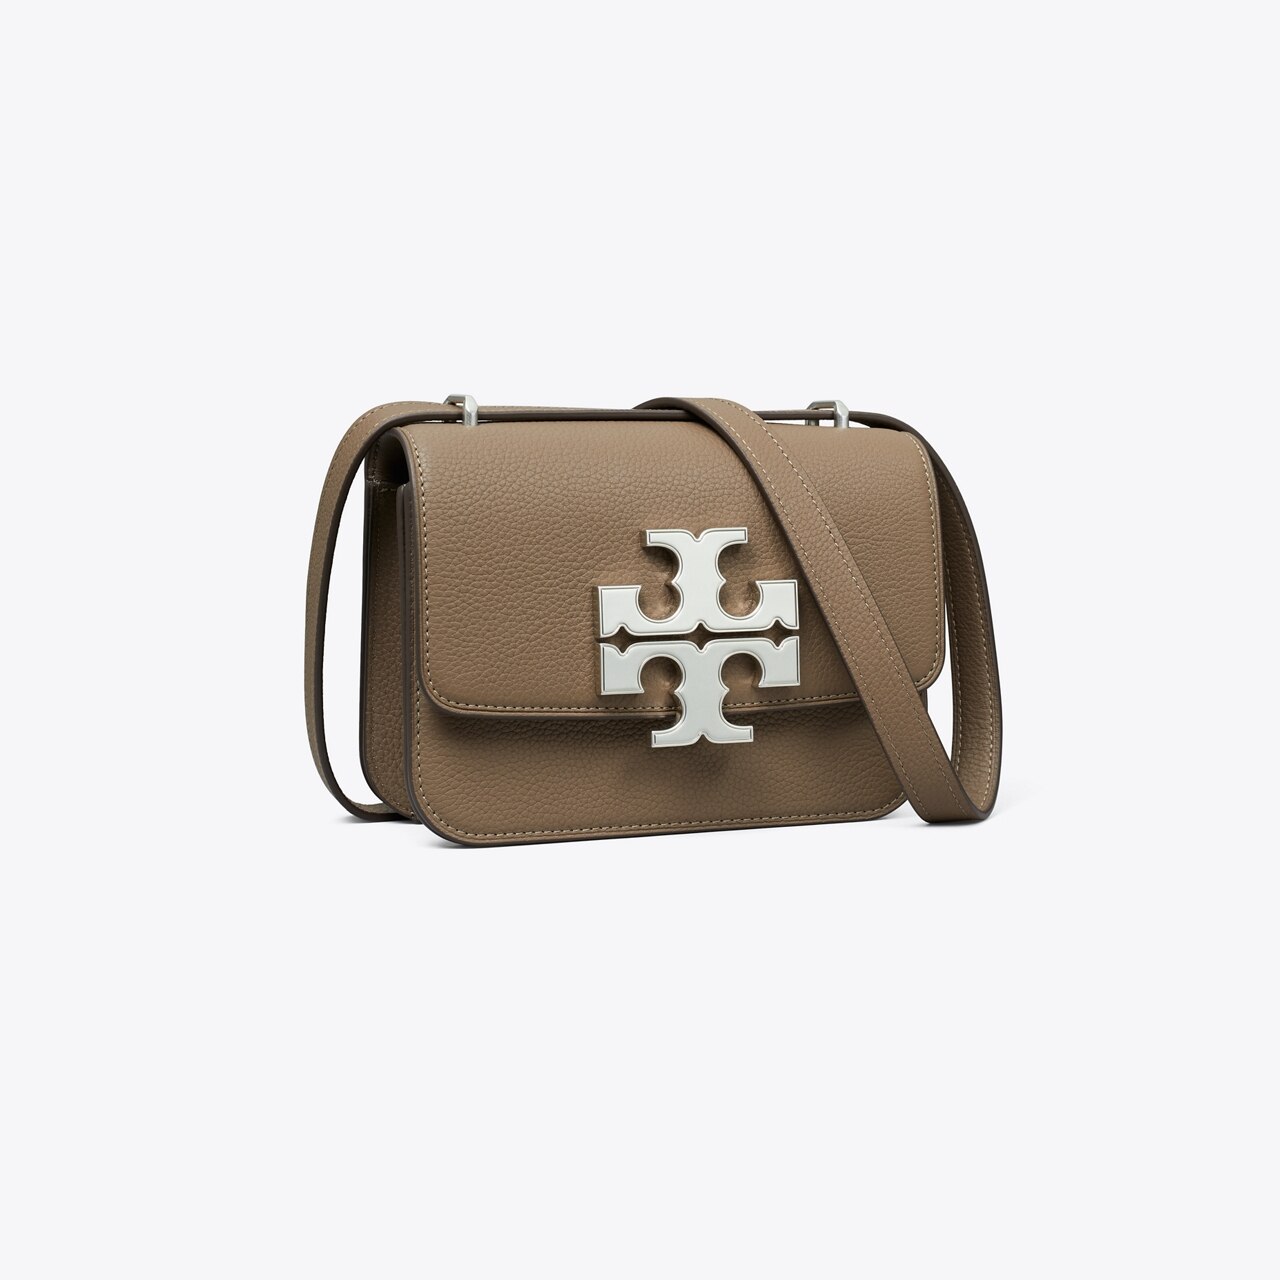 Tory Burch | Eleanor Small Convertible Leather Shoulder Bag | White Tu